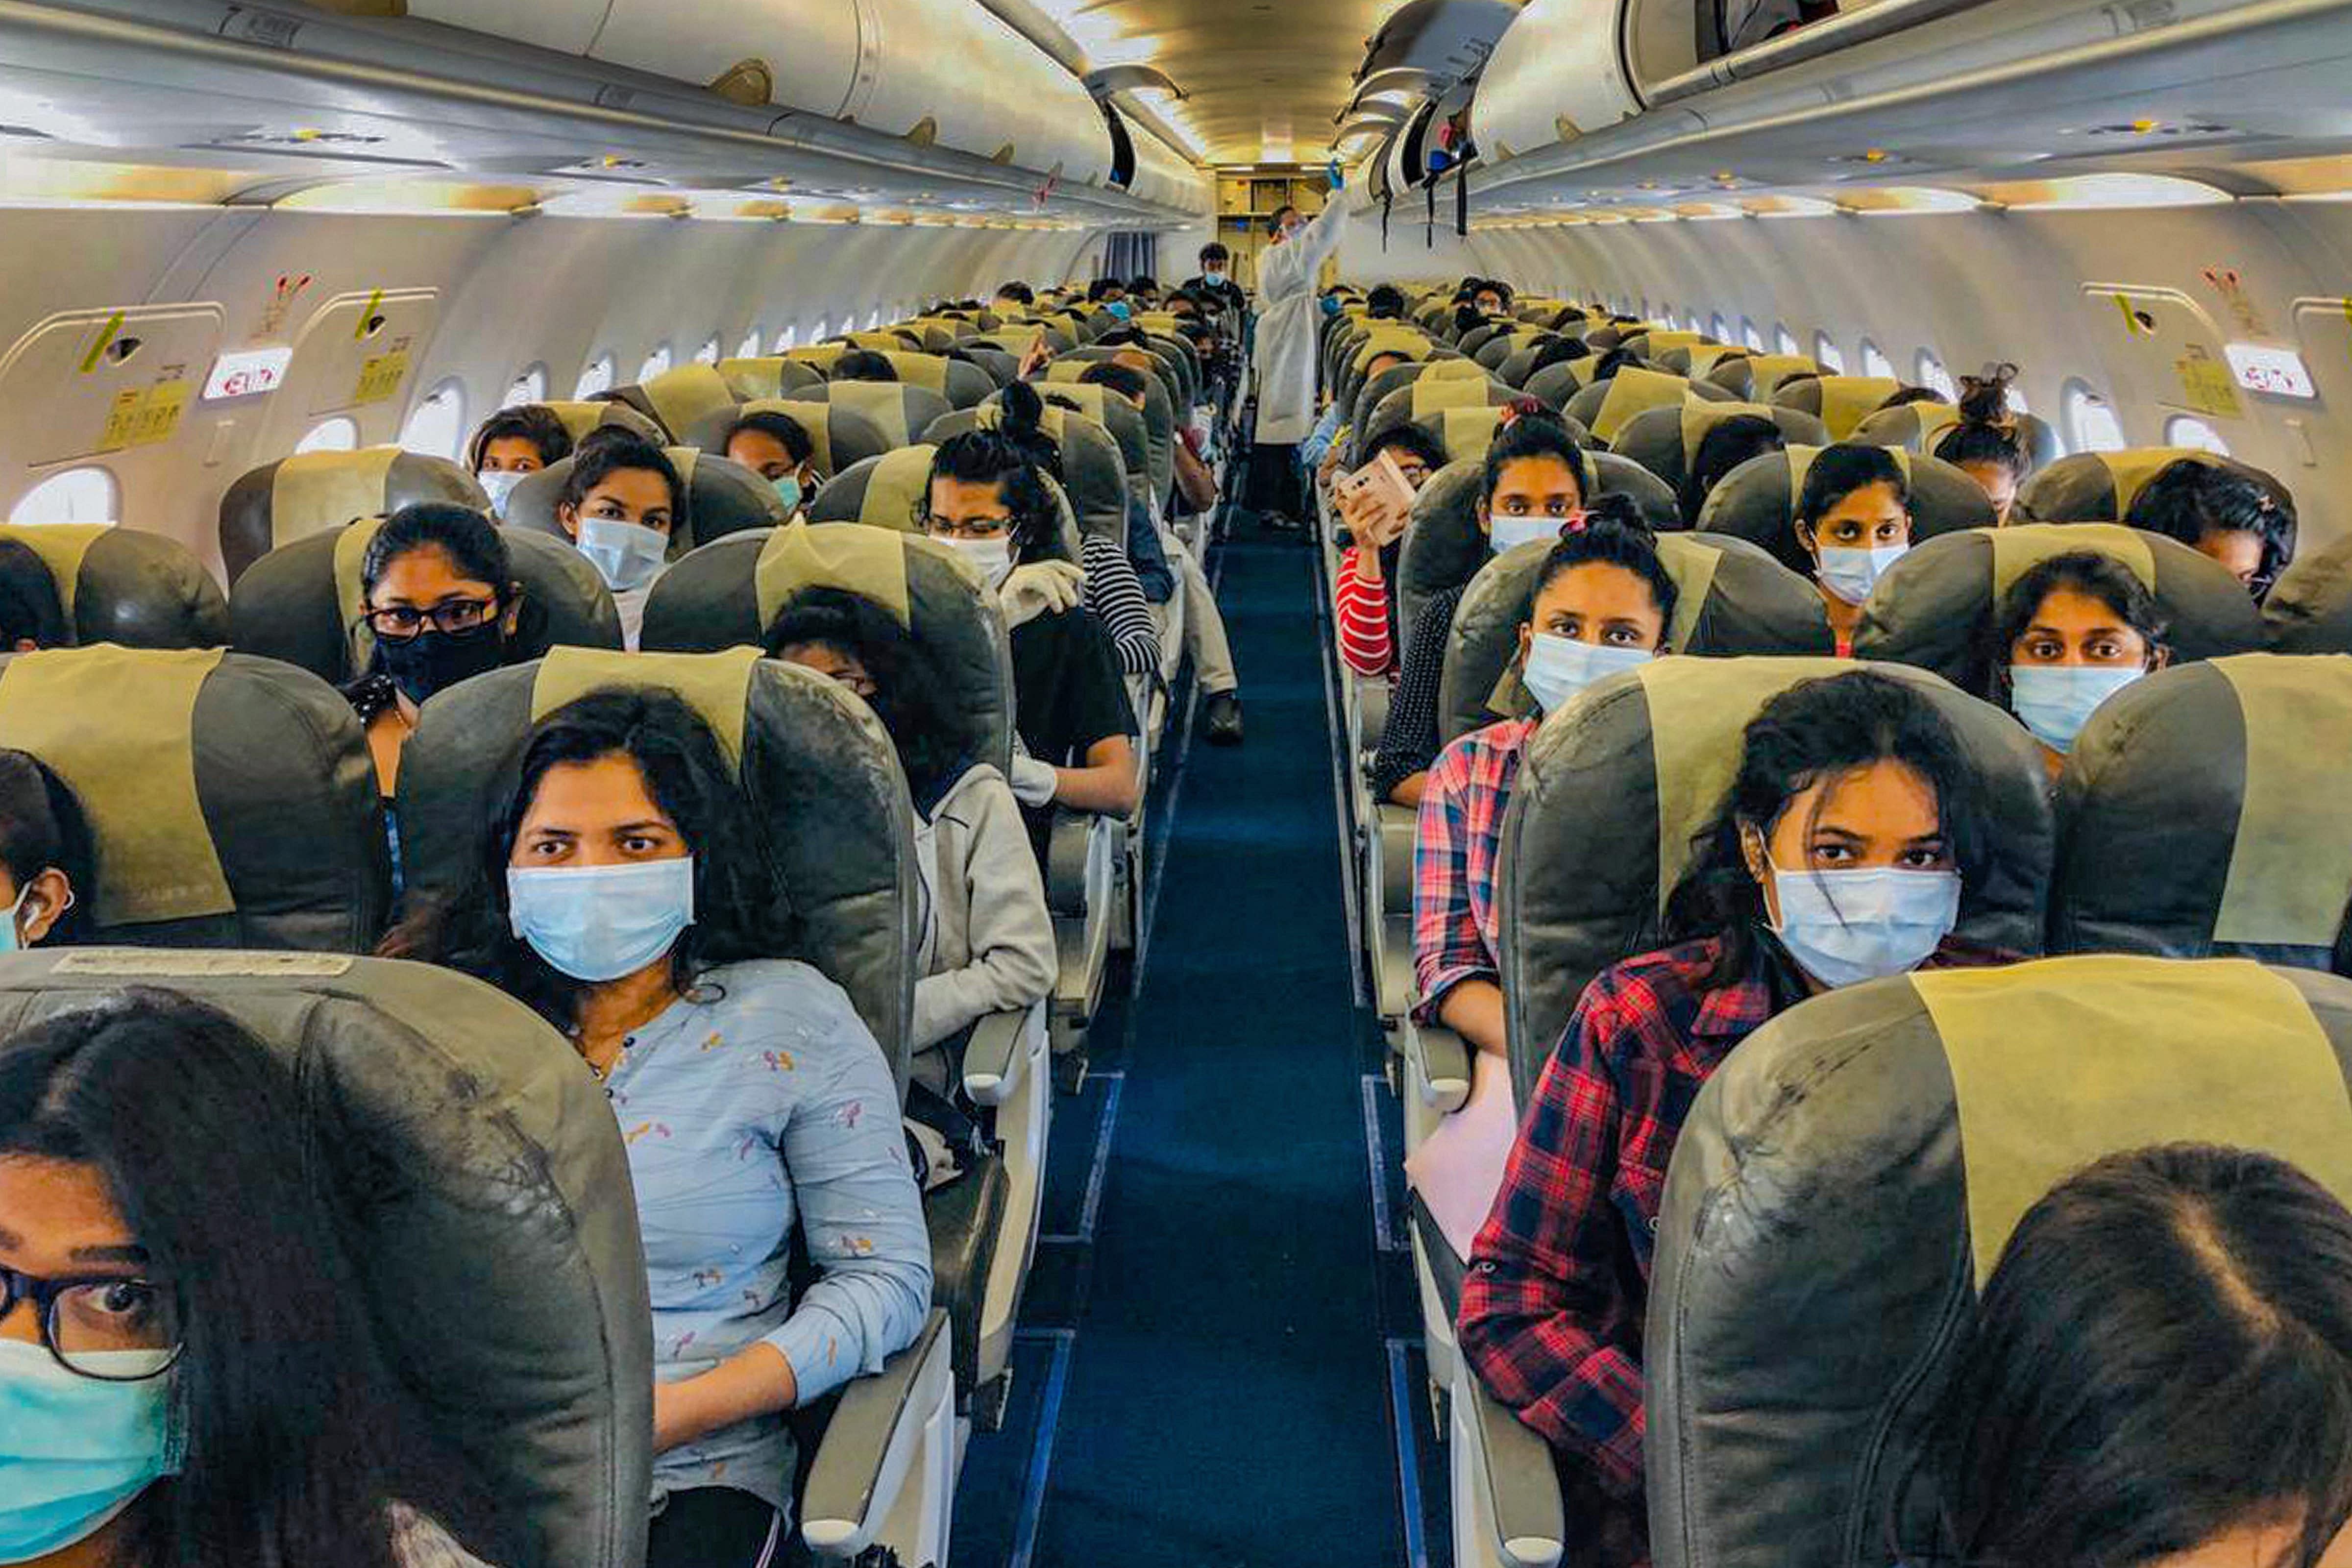  Sri Lankan students of Lovely Professional University (Jalandhar) board a special chartered plane for their home country, during the nationwide lockdown to curb the spread of coronavirus, in Amritsar. (Credit: PTI Photo)